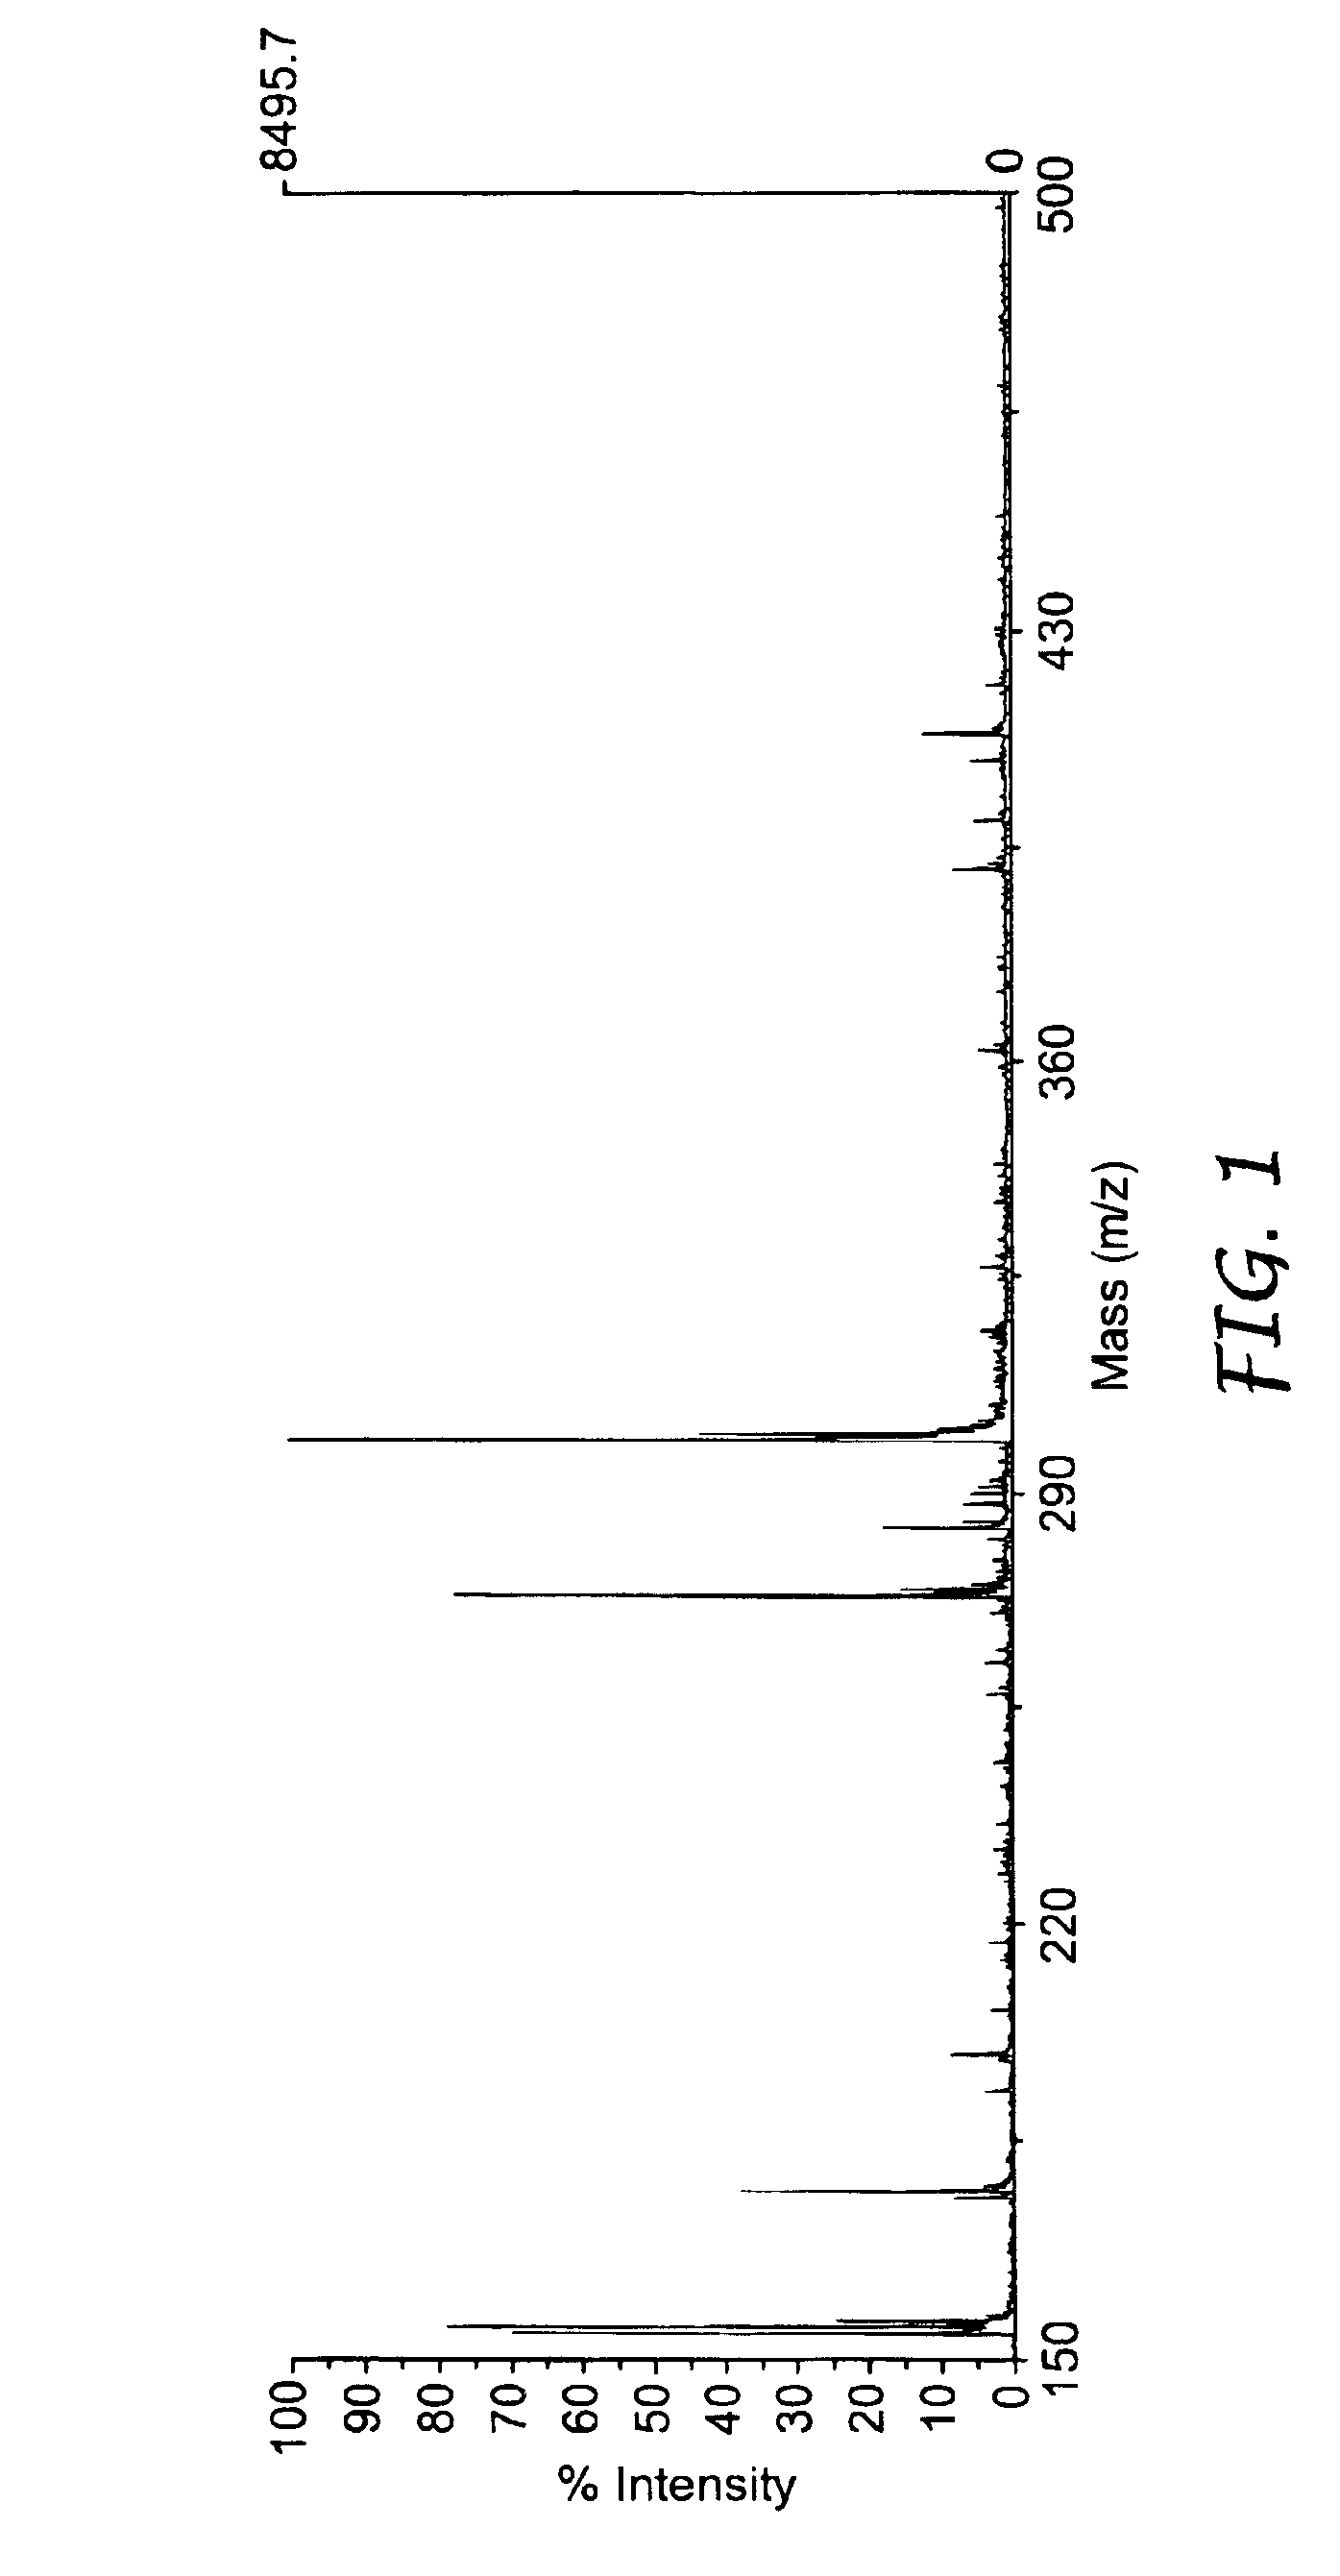 Microstructured polymeric substrate